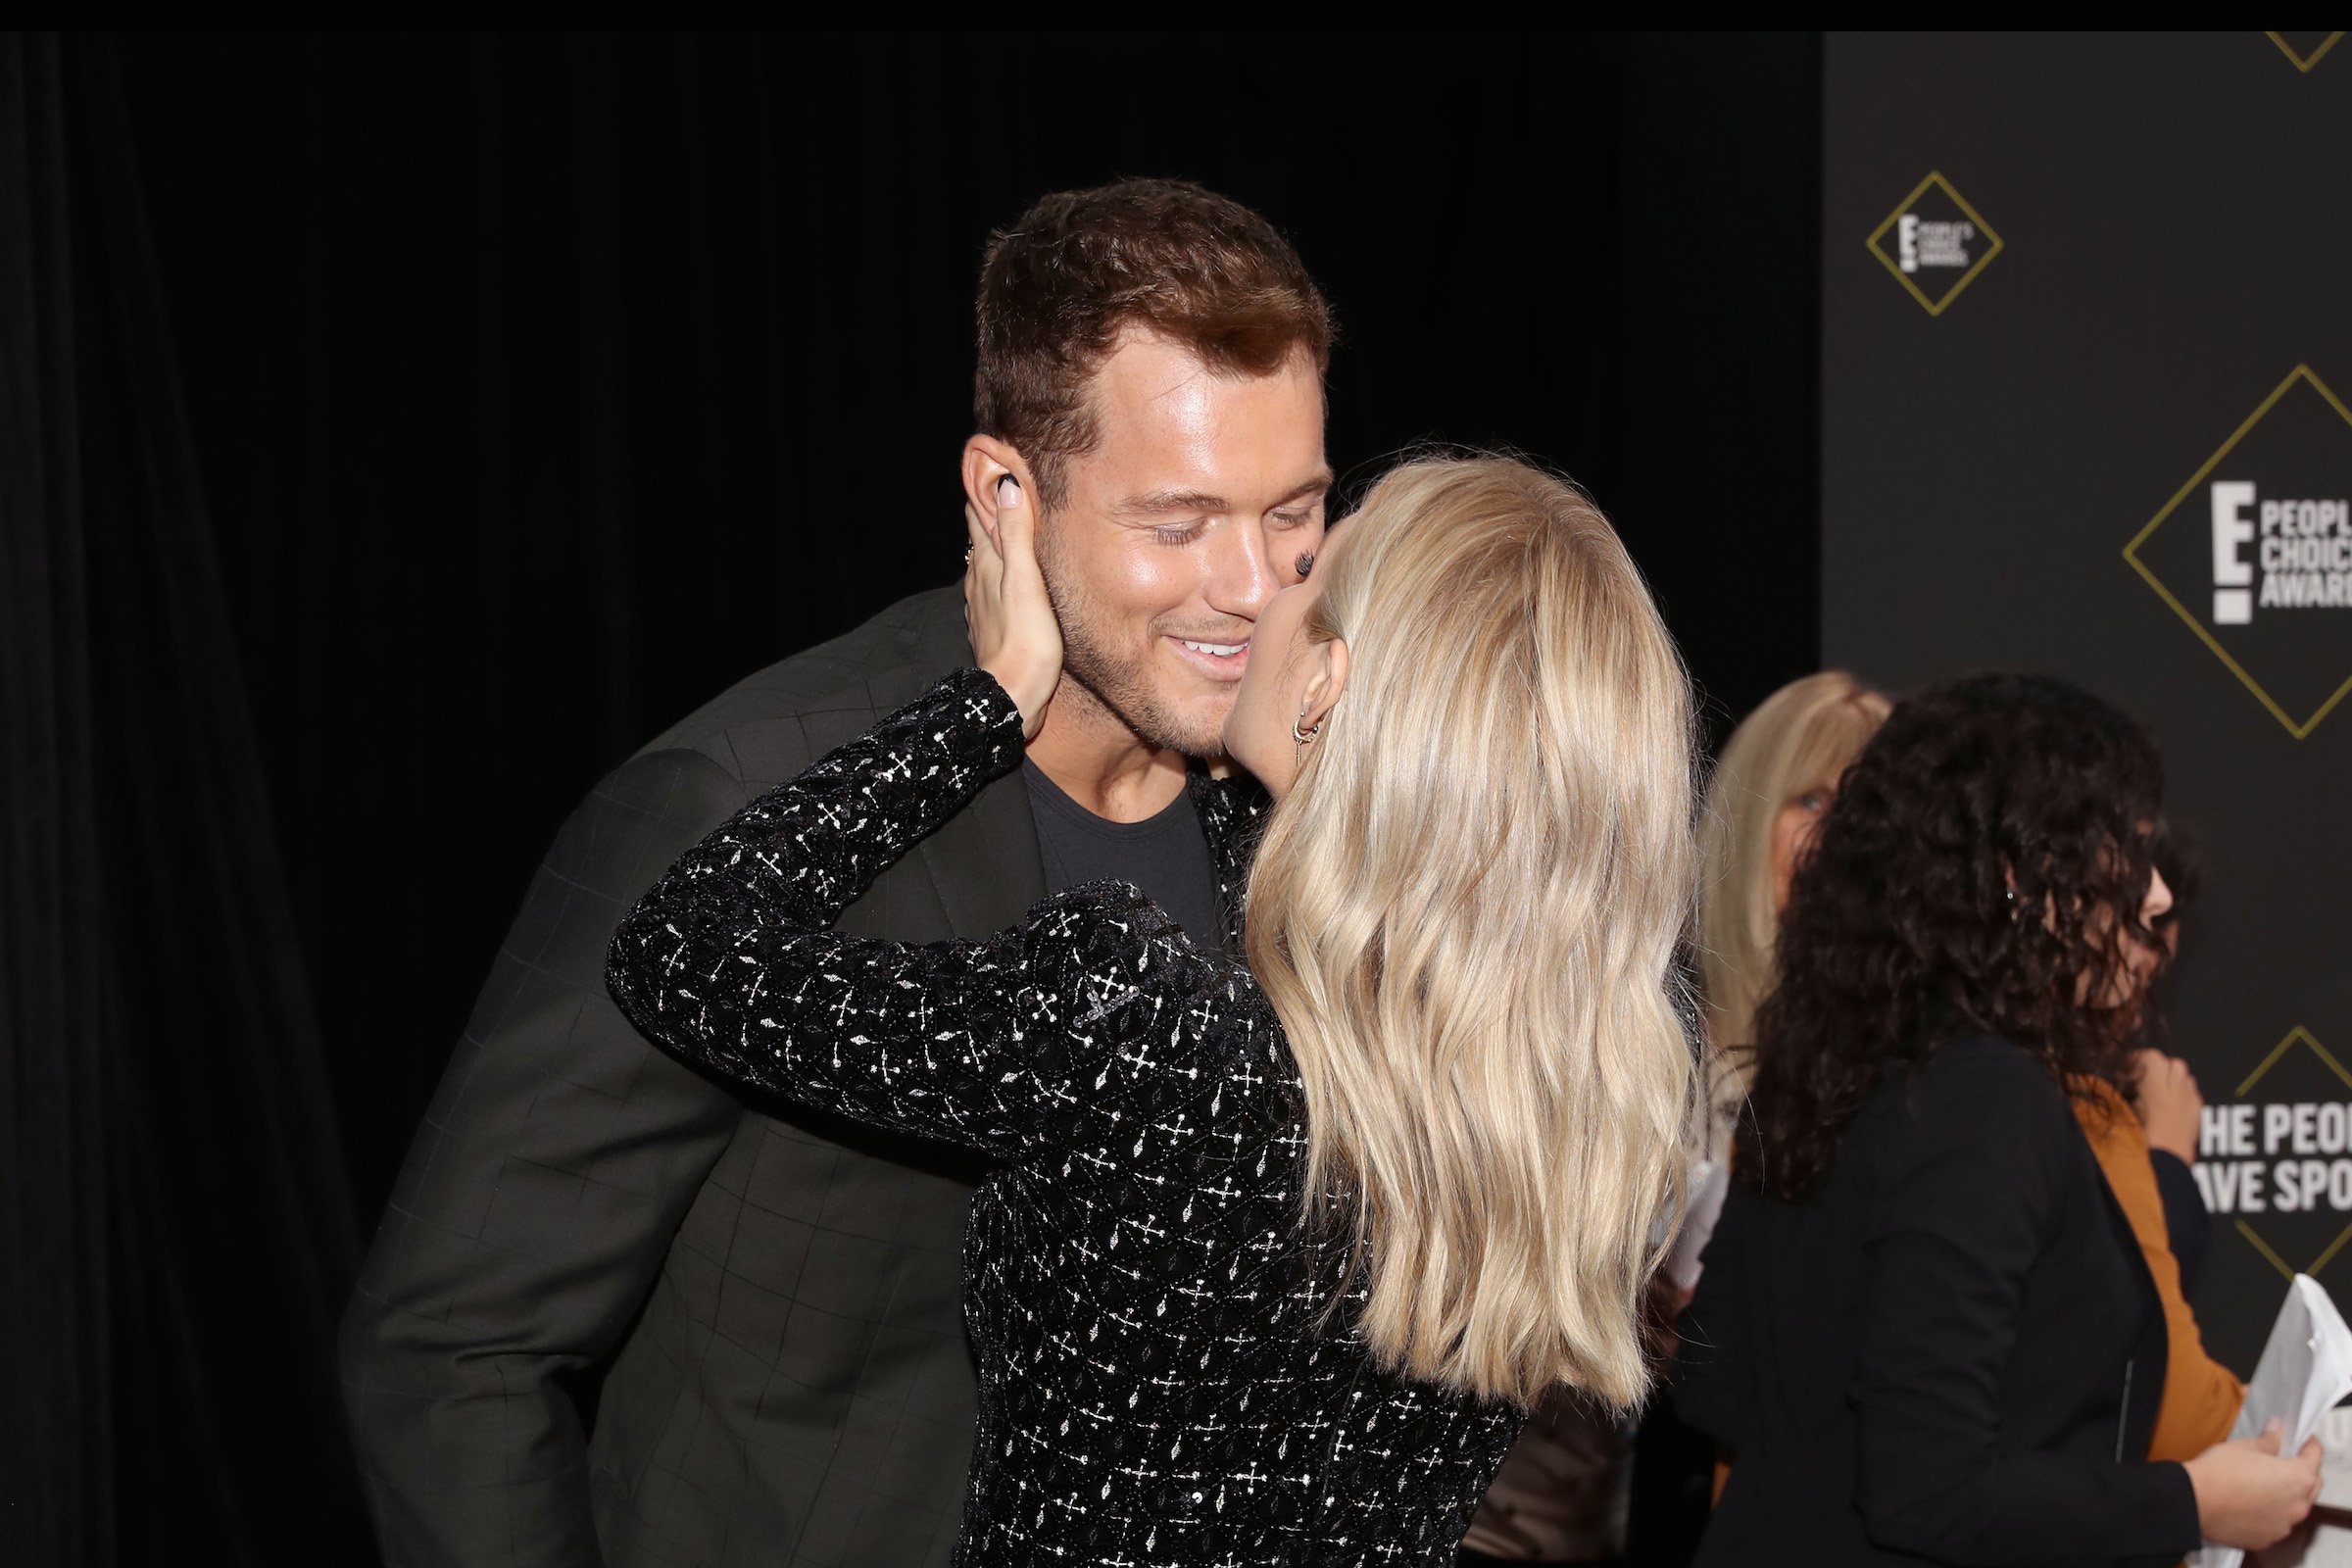 Colton Underwood and Cassie Randolph arrive to the 2019 E! People's Choice Awards